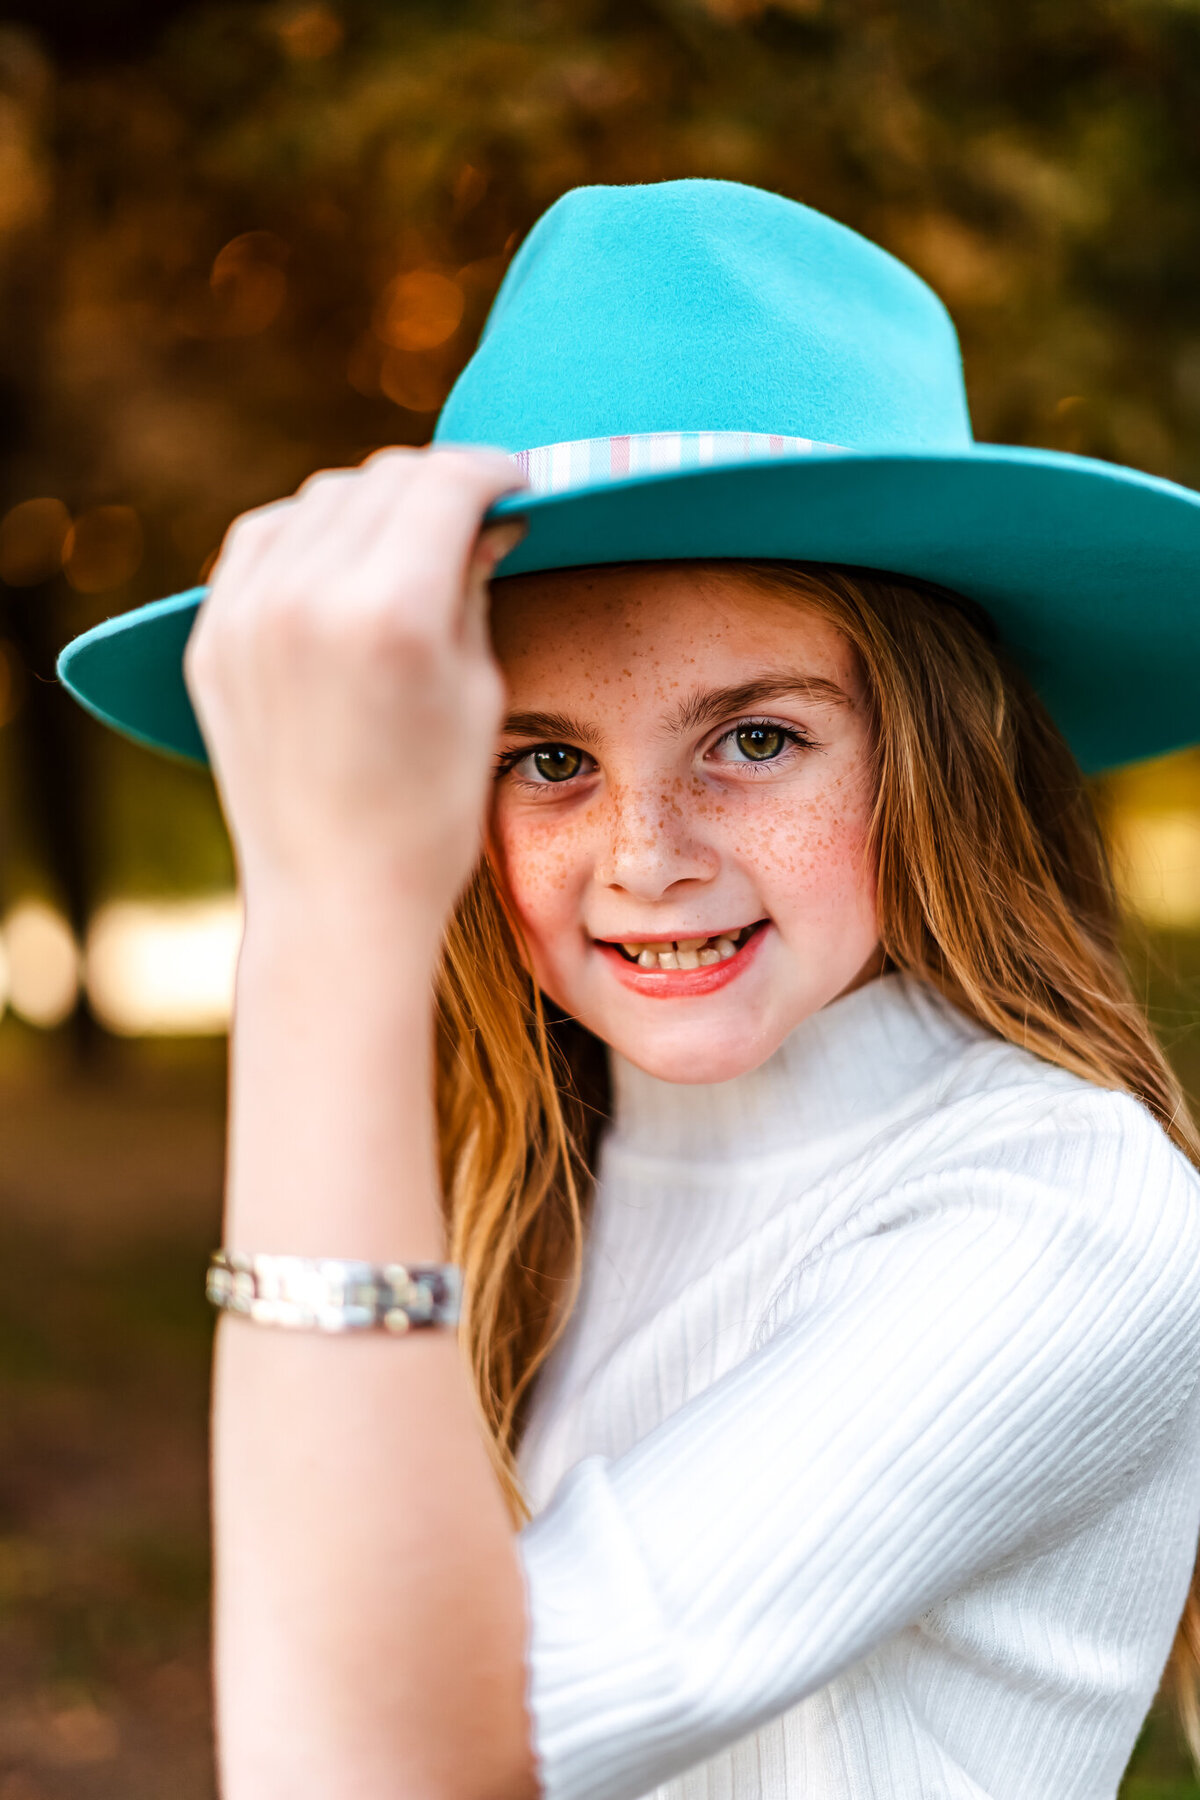 Girl in a blue hat smiling